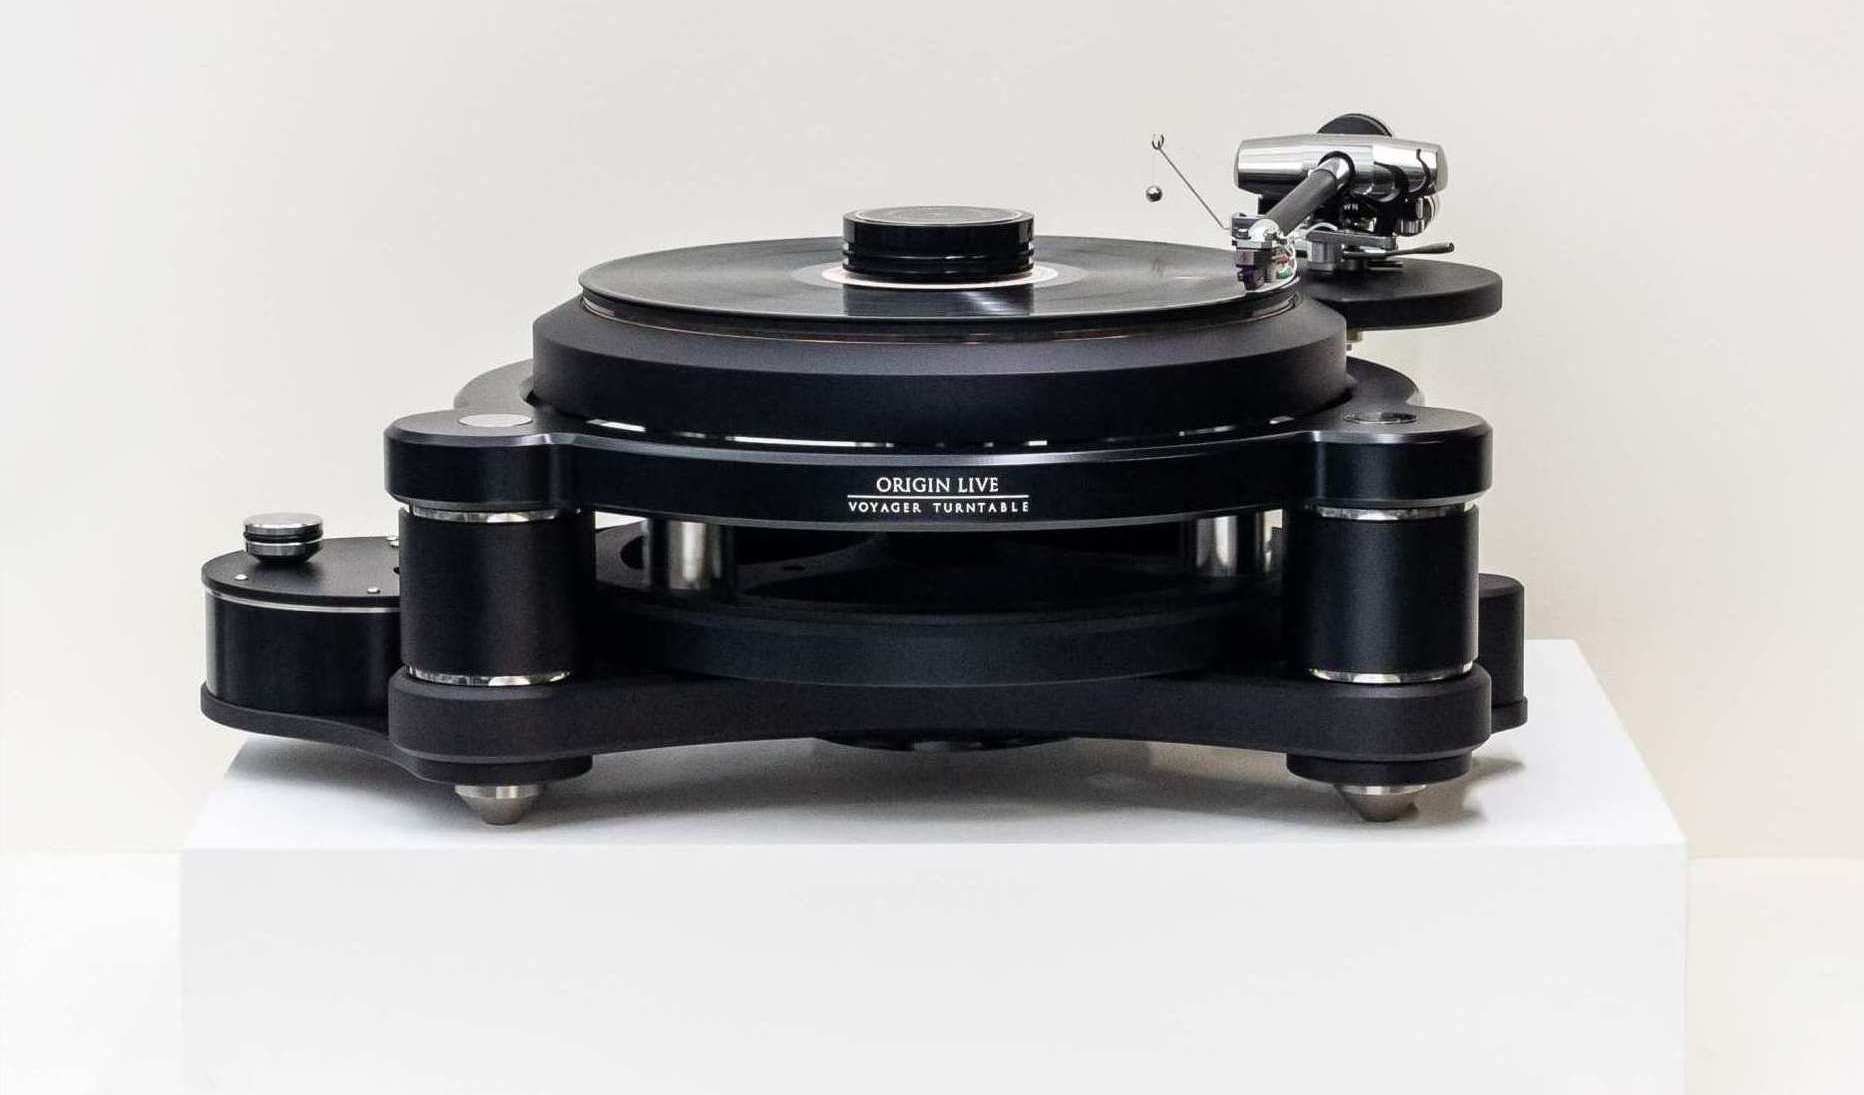 Voyager best ever Turntable made by origin live in the uk audiophile hifi ultimate record player